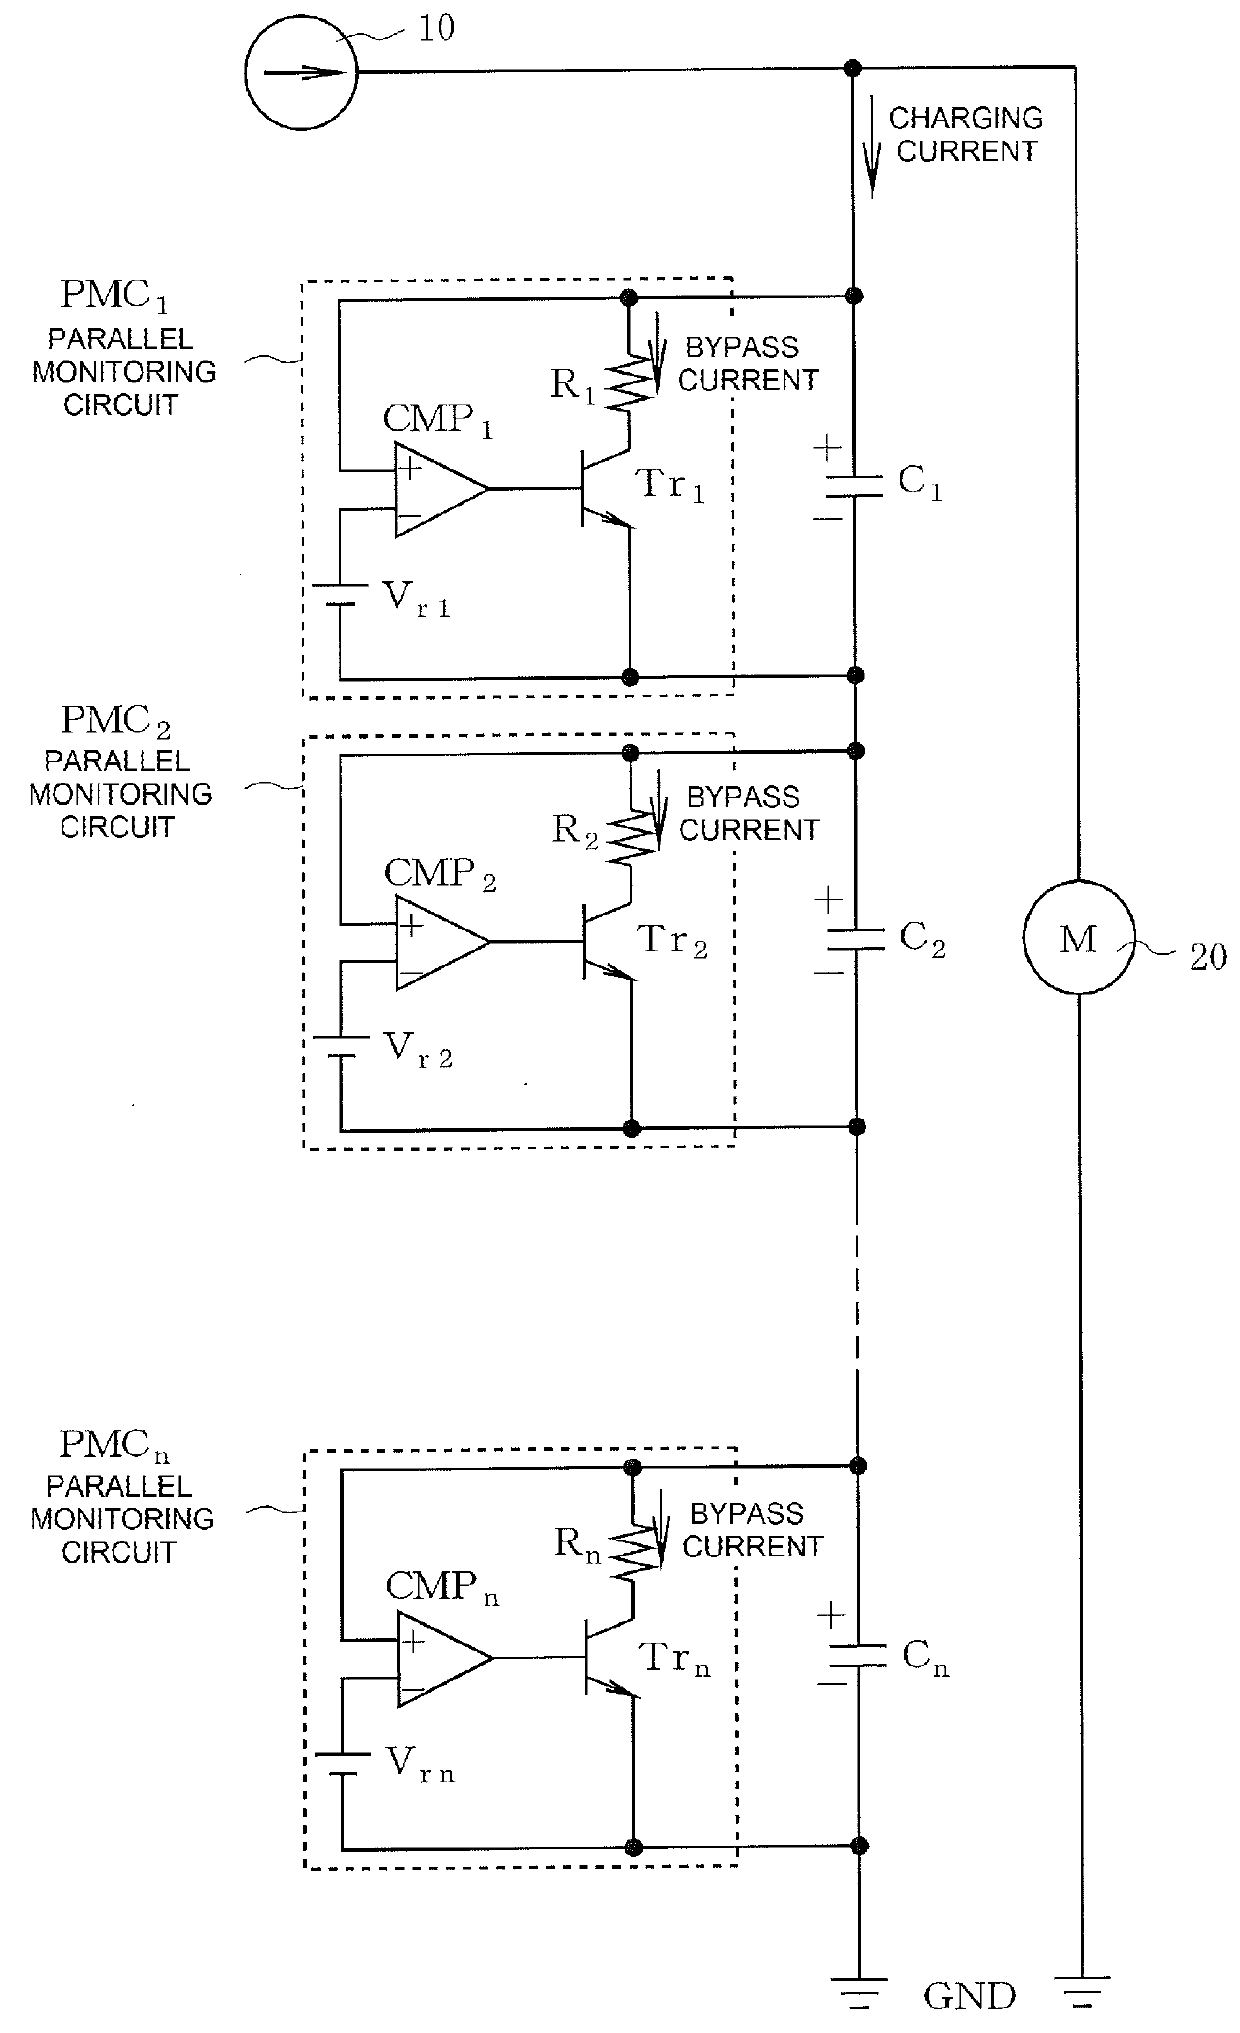 Parallel monitoring circuit for capacitor